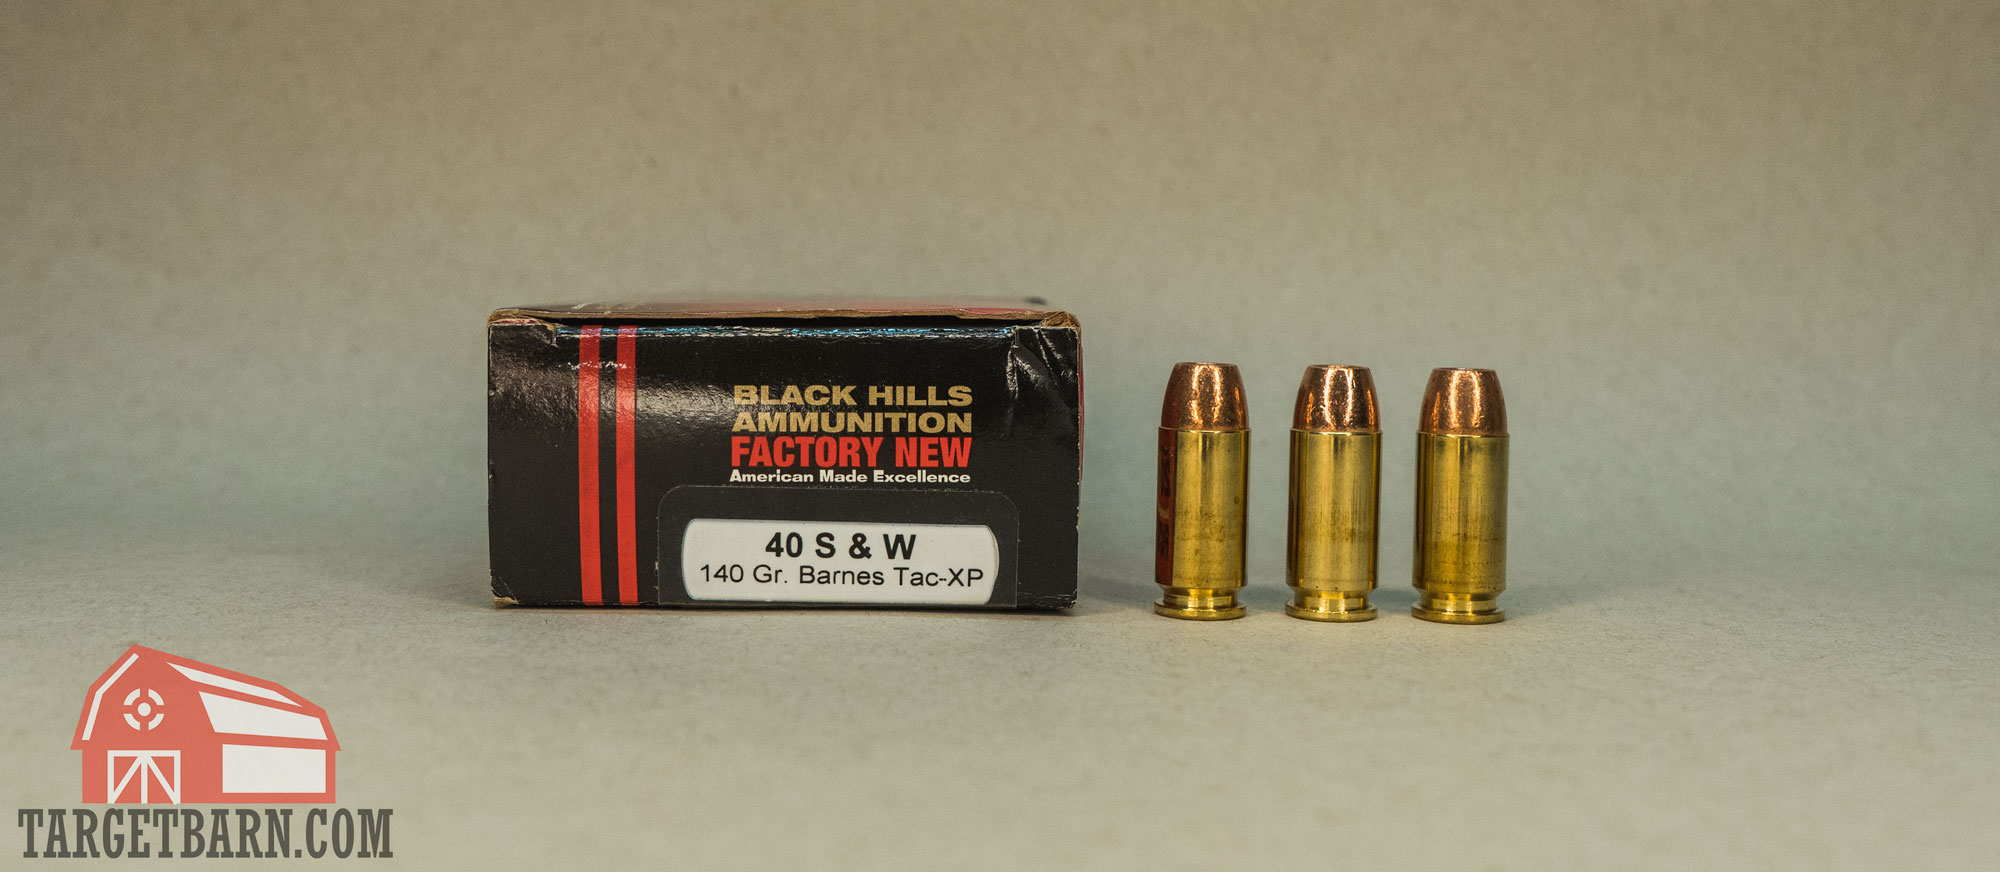 black hills 40 S&W ammo with three rounds